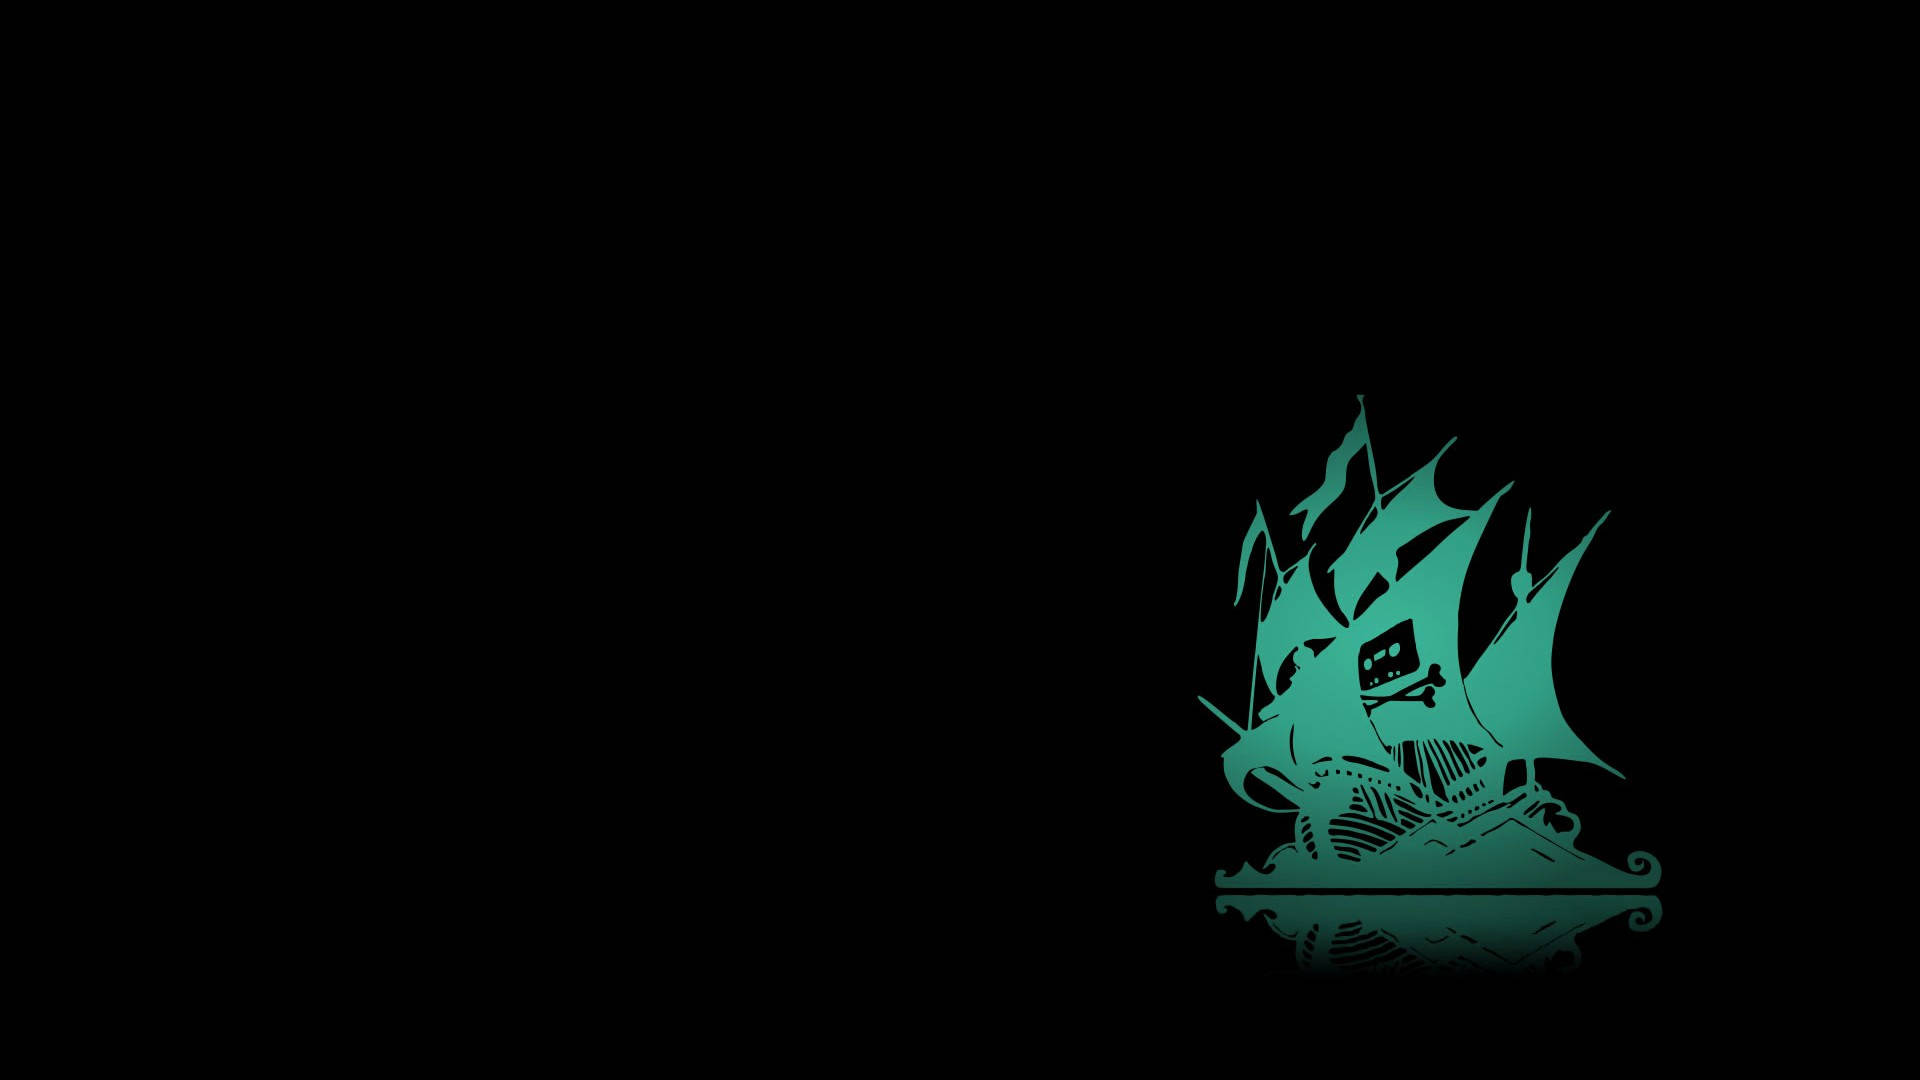 Teal Pirate Ship Background